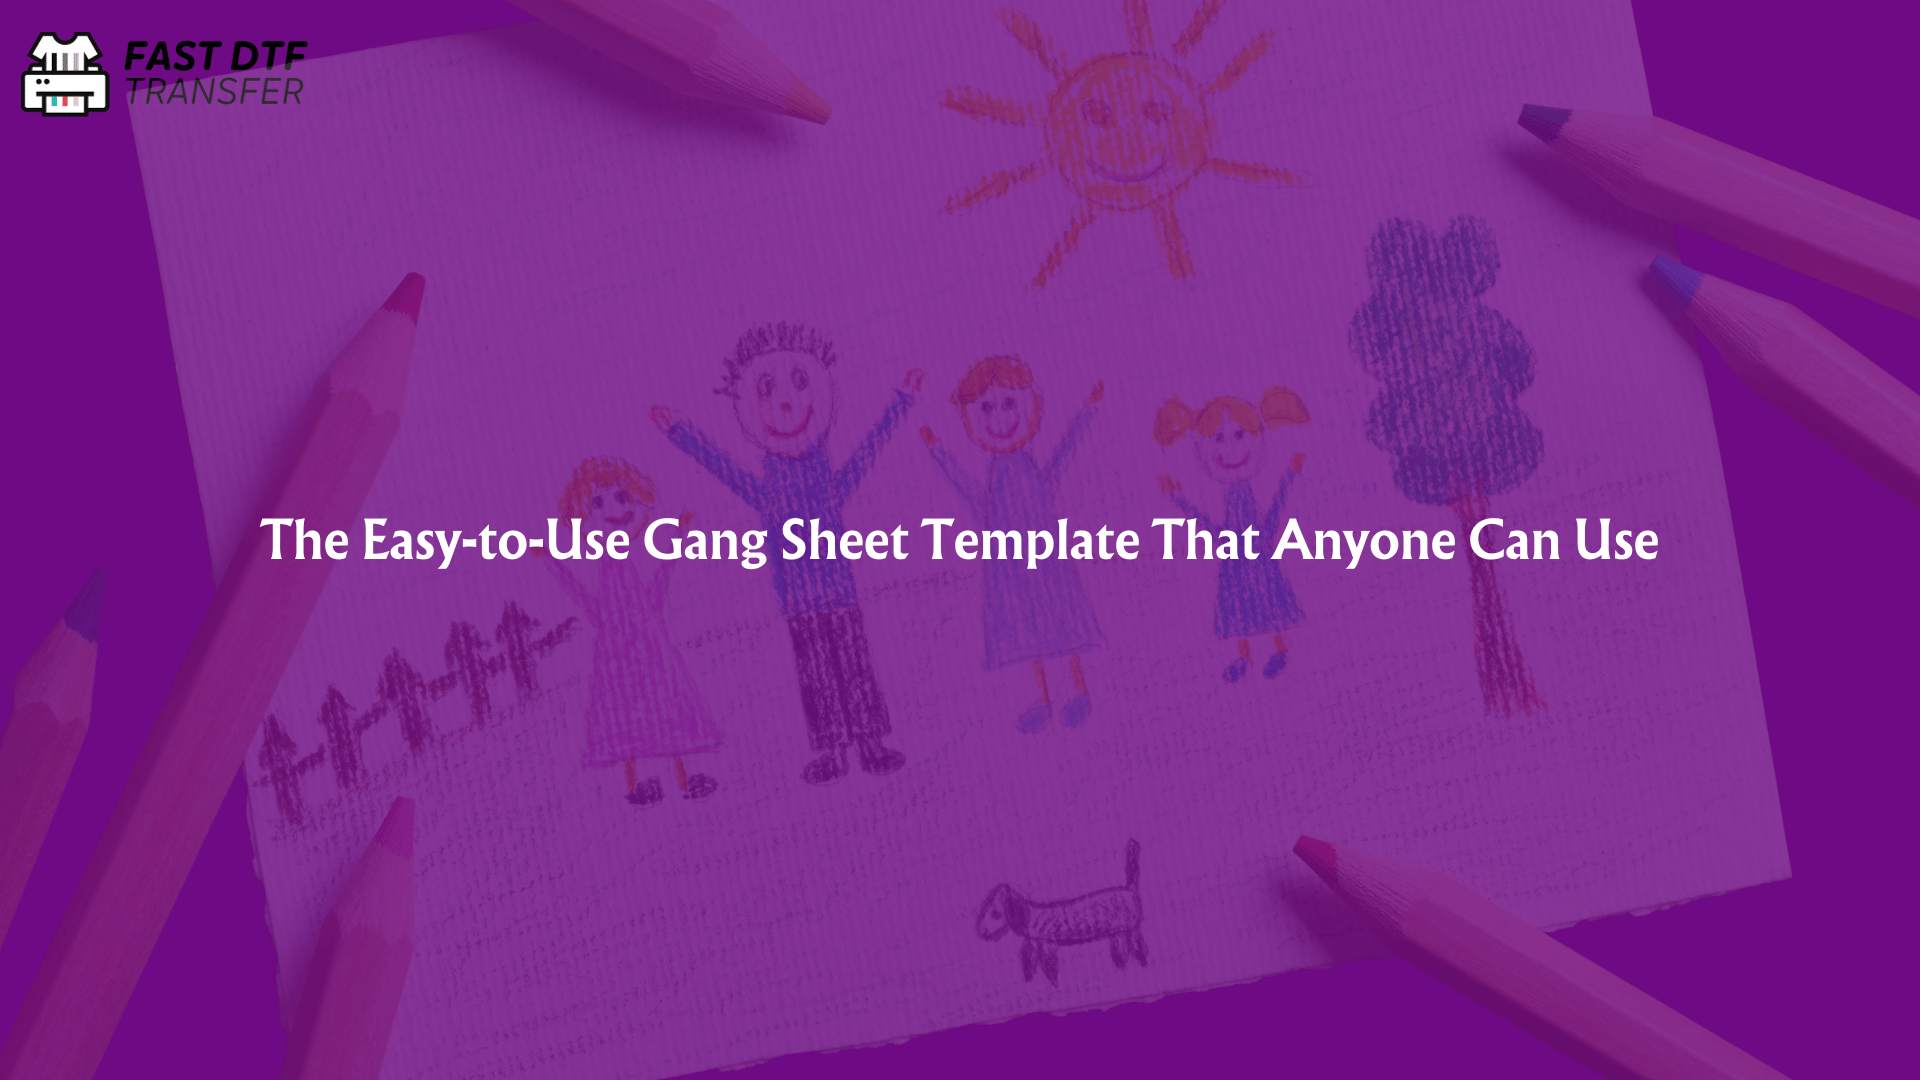 The Easy-to-Use Gang Sheet Template That Anyone Can Use